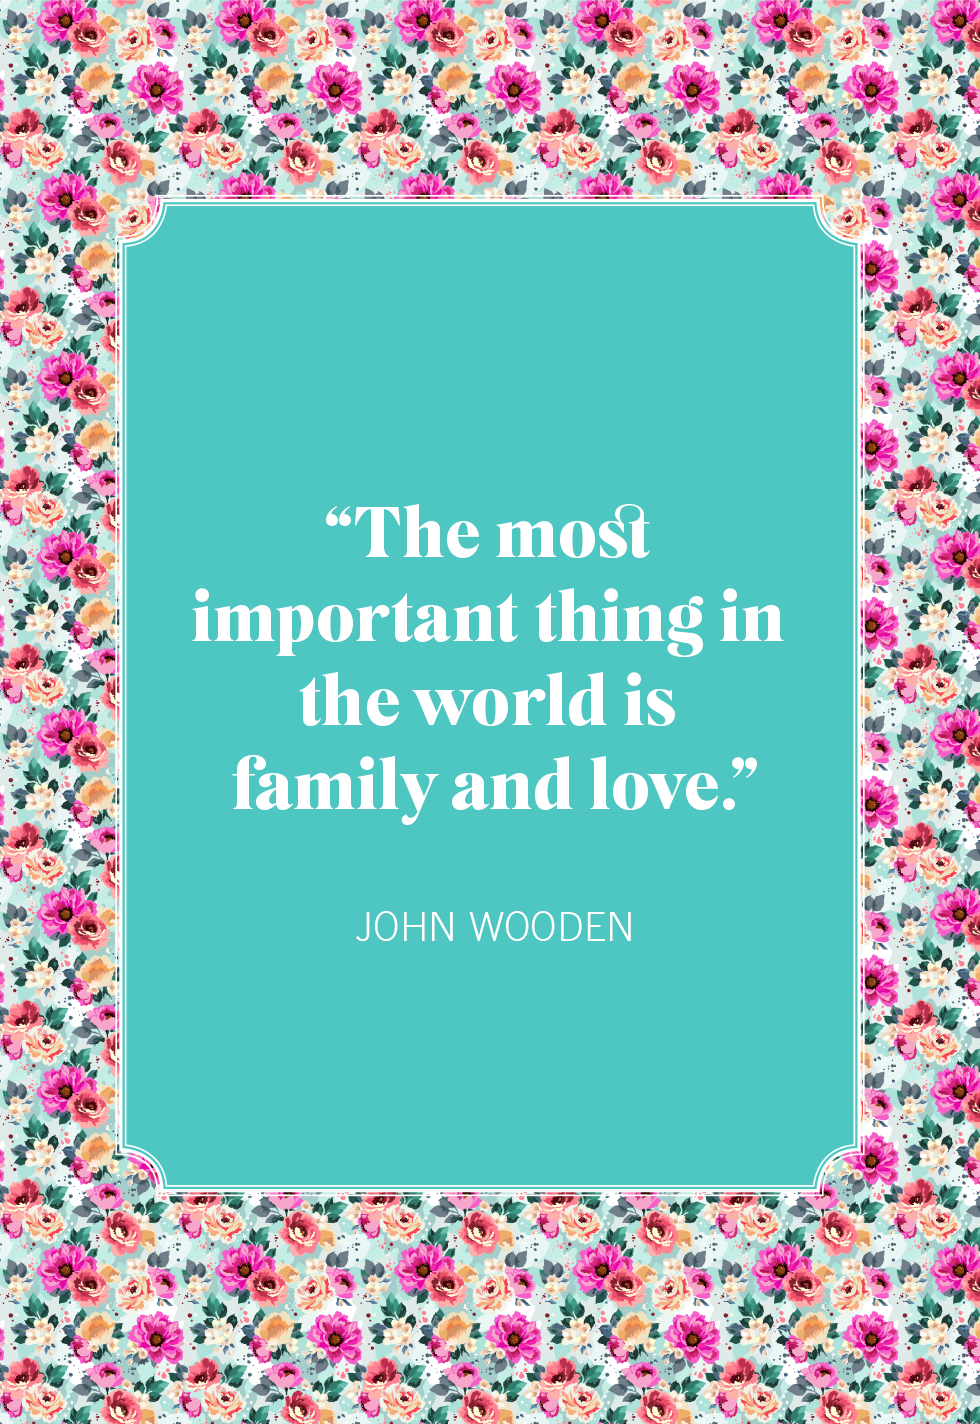 60 Best Family Quotes and Sayings. Short Quotes About the Importance of  Family